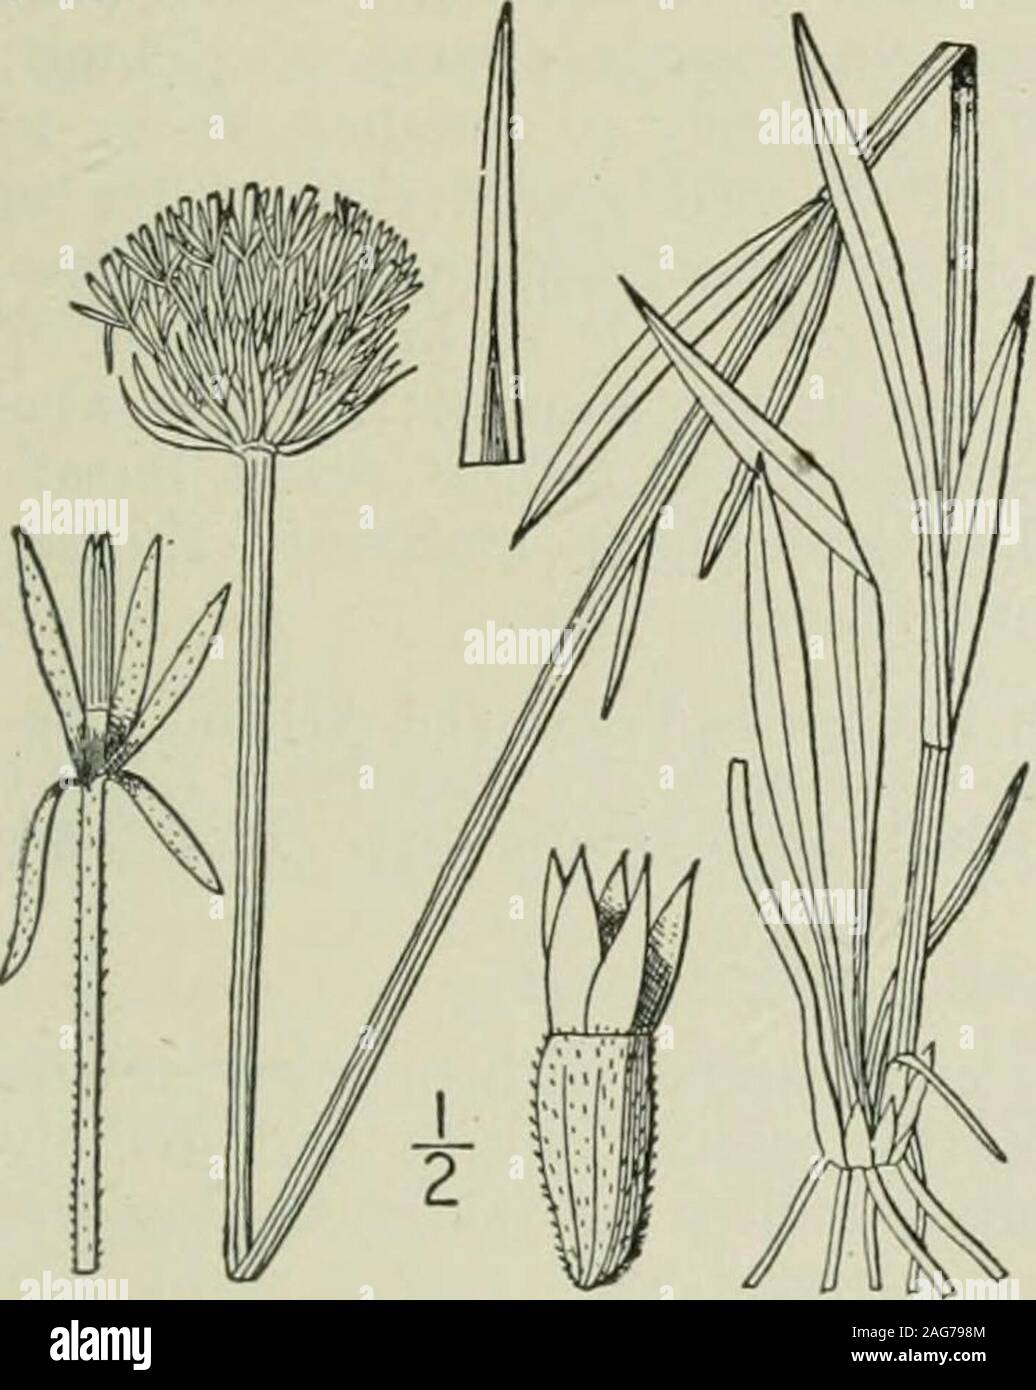 . An illustrated flora of the northern United States, Canada and the British possessions : from Newfoundland to the parallel of the southern boundary of Virginia and from the Atlantic Ocean westward to the 102nd meridian. e basal spatulate, or obovate. Chaflf of the receptacle linear; leaves linear; western. Chaff of the receptacle broader; leaves obovate to lanceolate; eastern. I. Marshallia trinervia (Walt.) Porter. Broad-leaved Alarshallia. Fig. 4524. Athanasia trinervia Walt. Fl, Car. 201. 1788.Marshallia Schreberi Gmelin, Syst. 1208. 1791.Marshallia latifolia Pursh, Fl. Am. Sept. 519. 181 Stock Photo